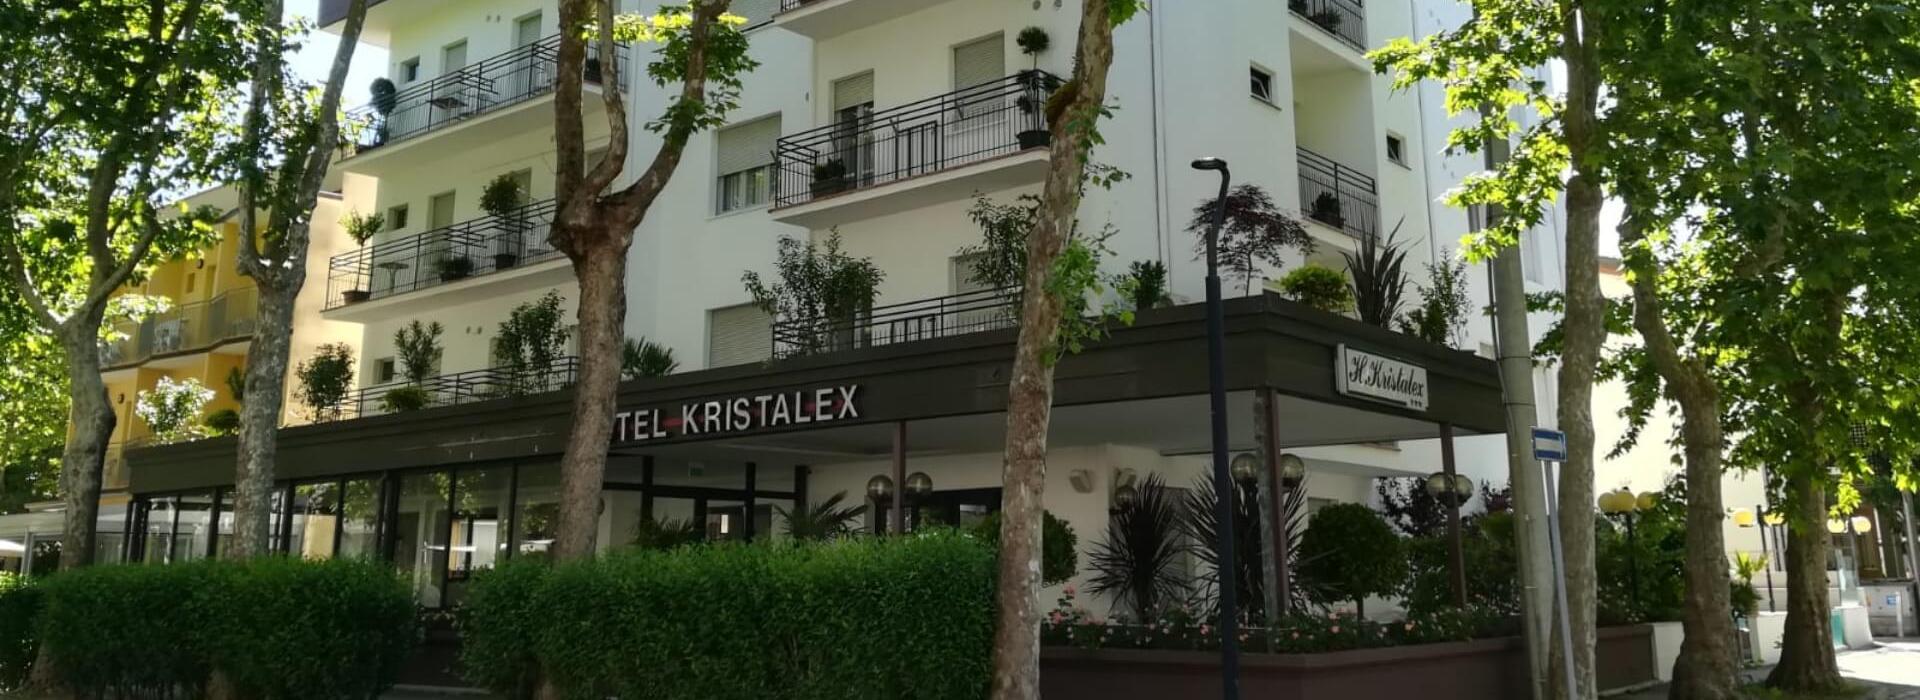 hotelkristalex en easter-holiday-in-cesenatico-in-pet-friendly-hotel-near-the-sea-and-the-centre-of-town 015